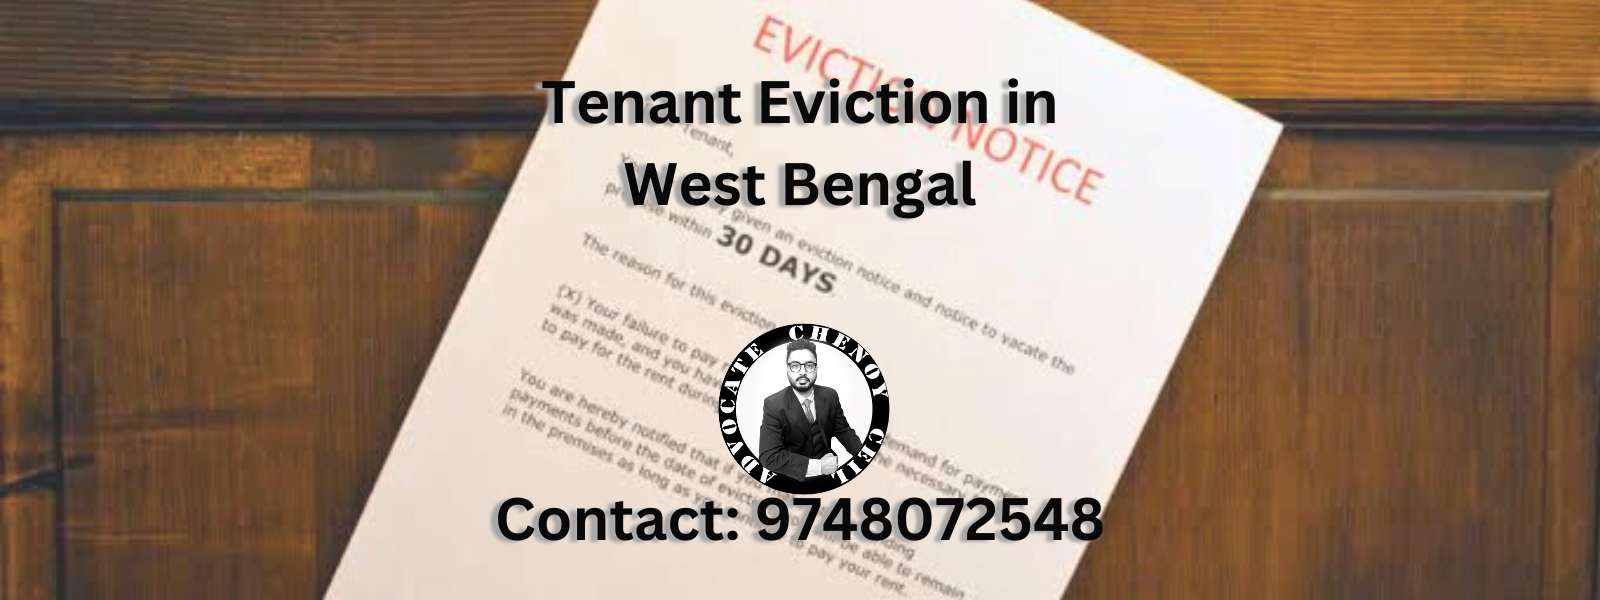 Eviction of Tenant in West Bengal